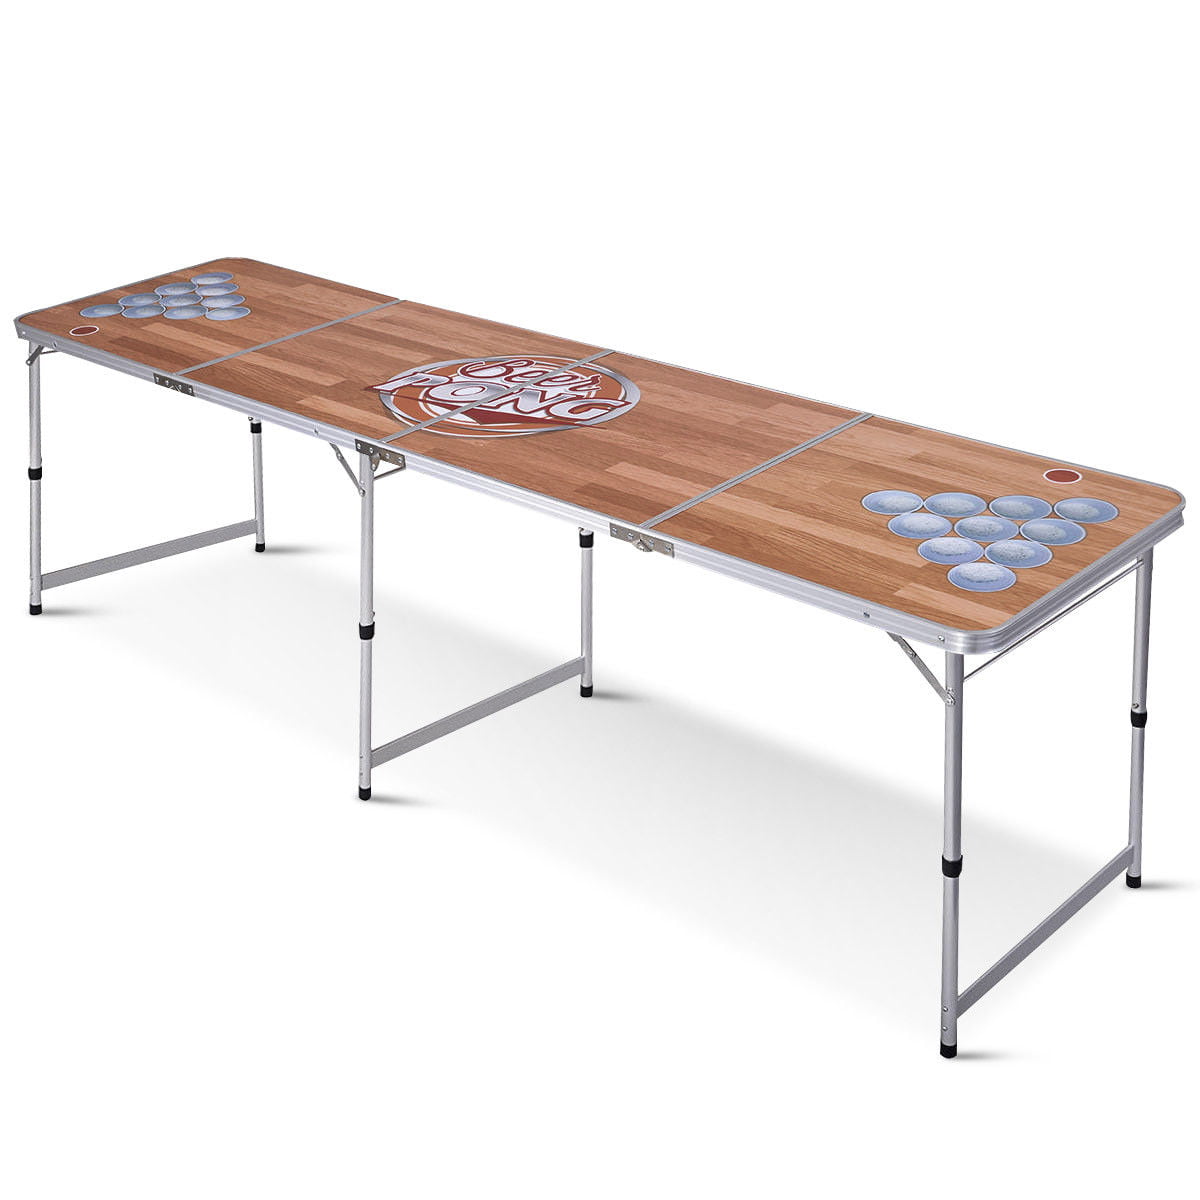 Details about   Beer Pong Table 3ft Portable Aluminum Alloy Drinking Game Table Camping Table 